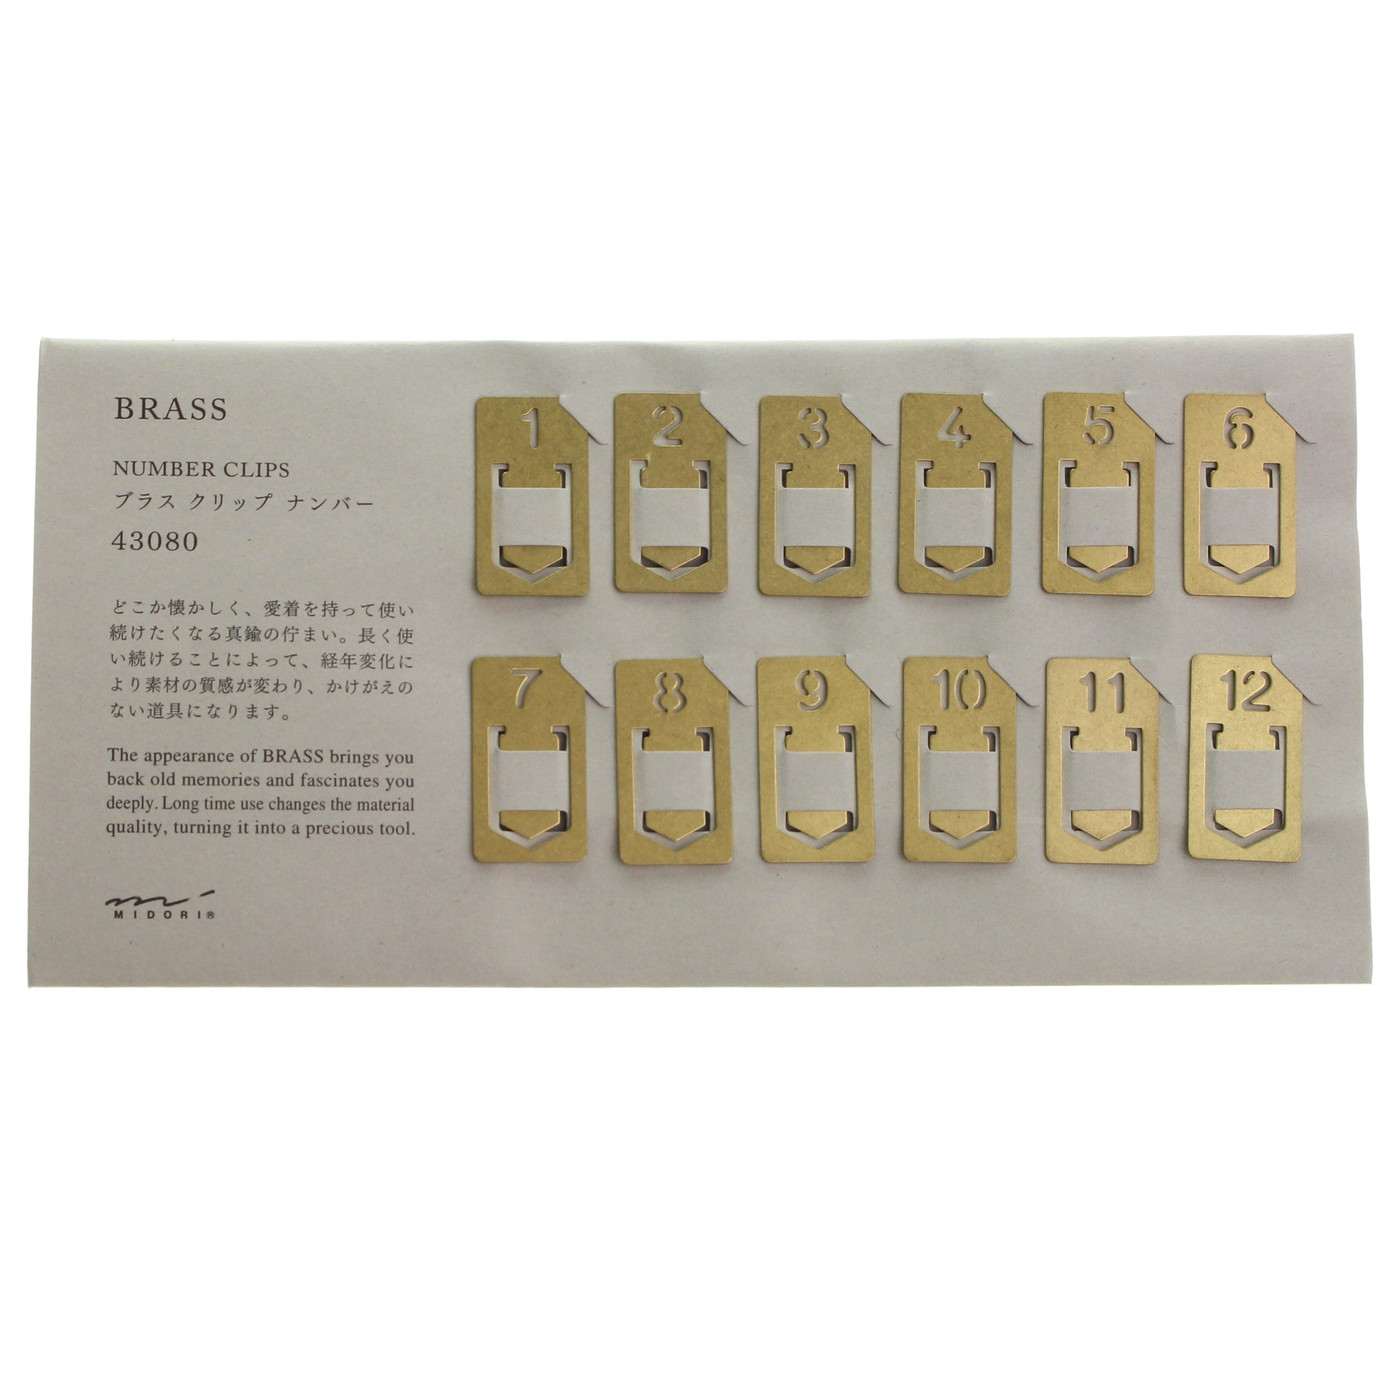 TRAVELER'S COMPANY Brass Number Clips